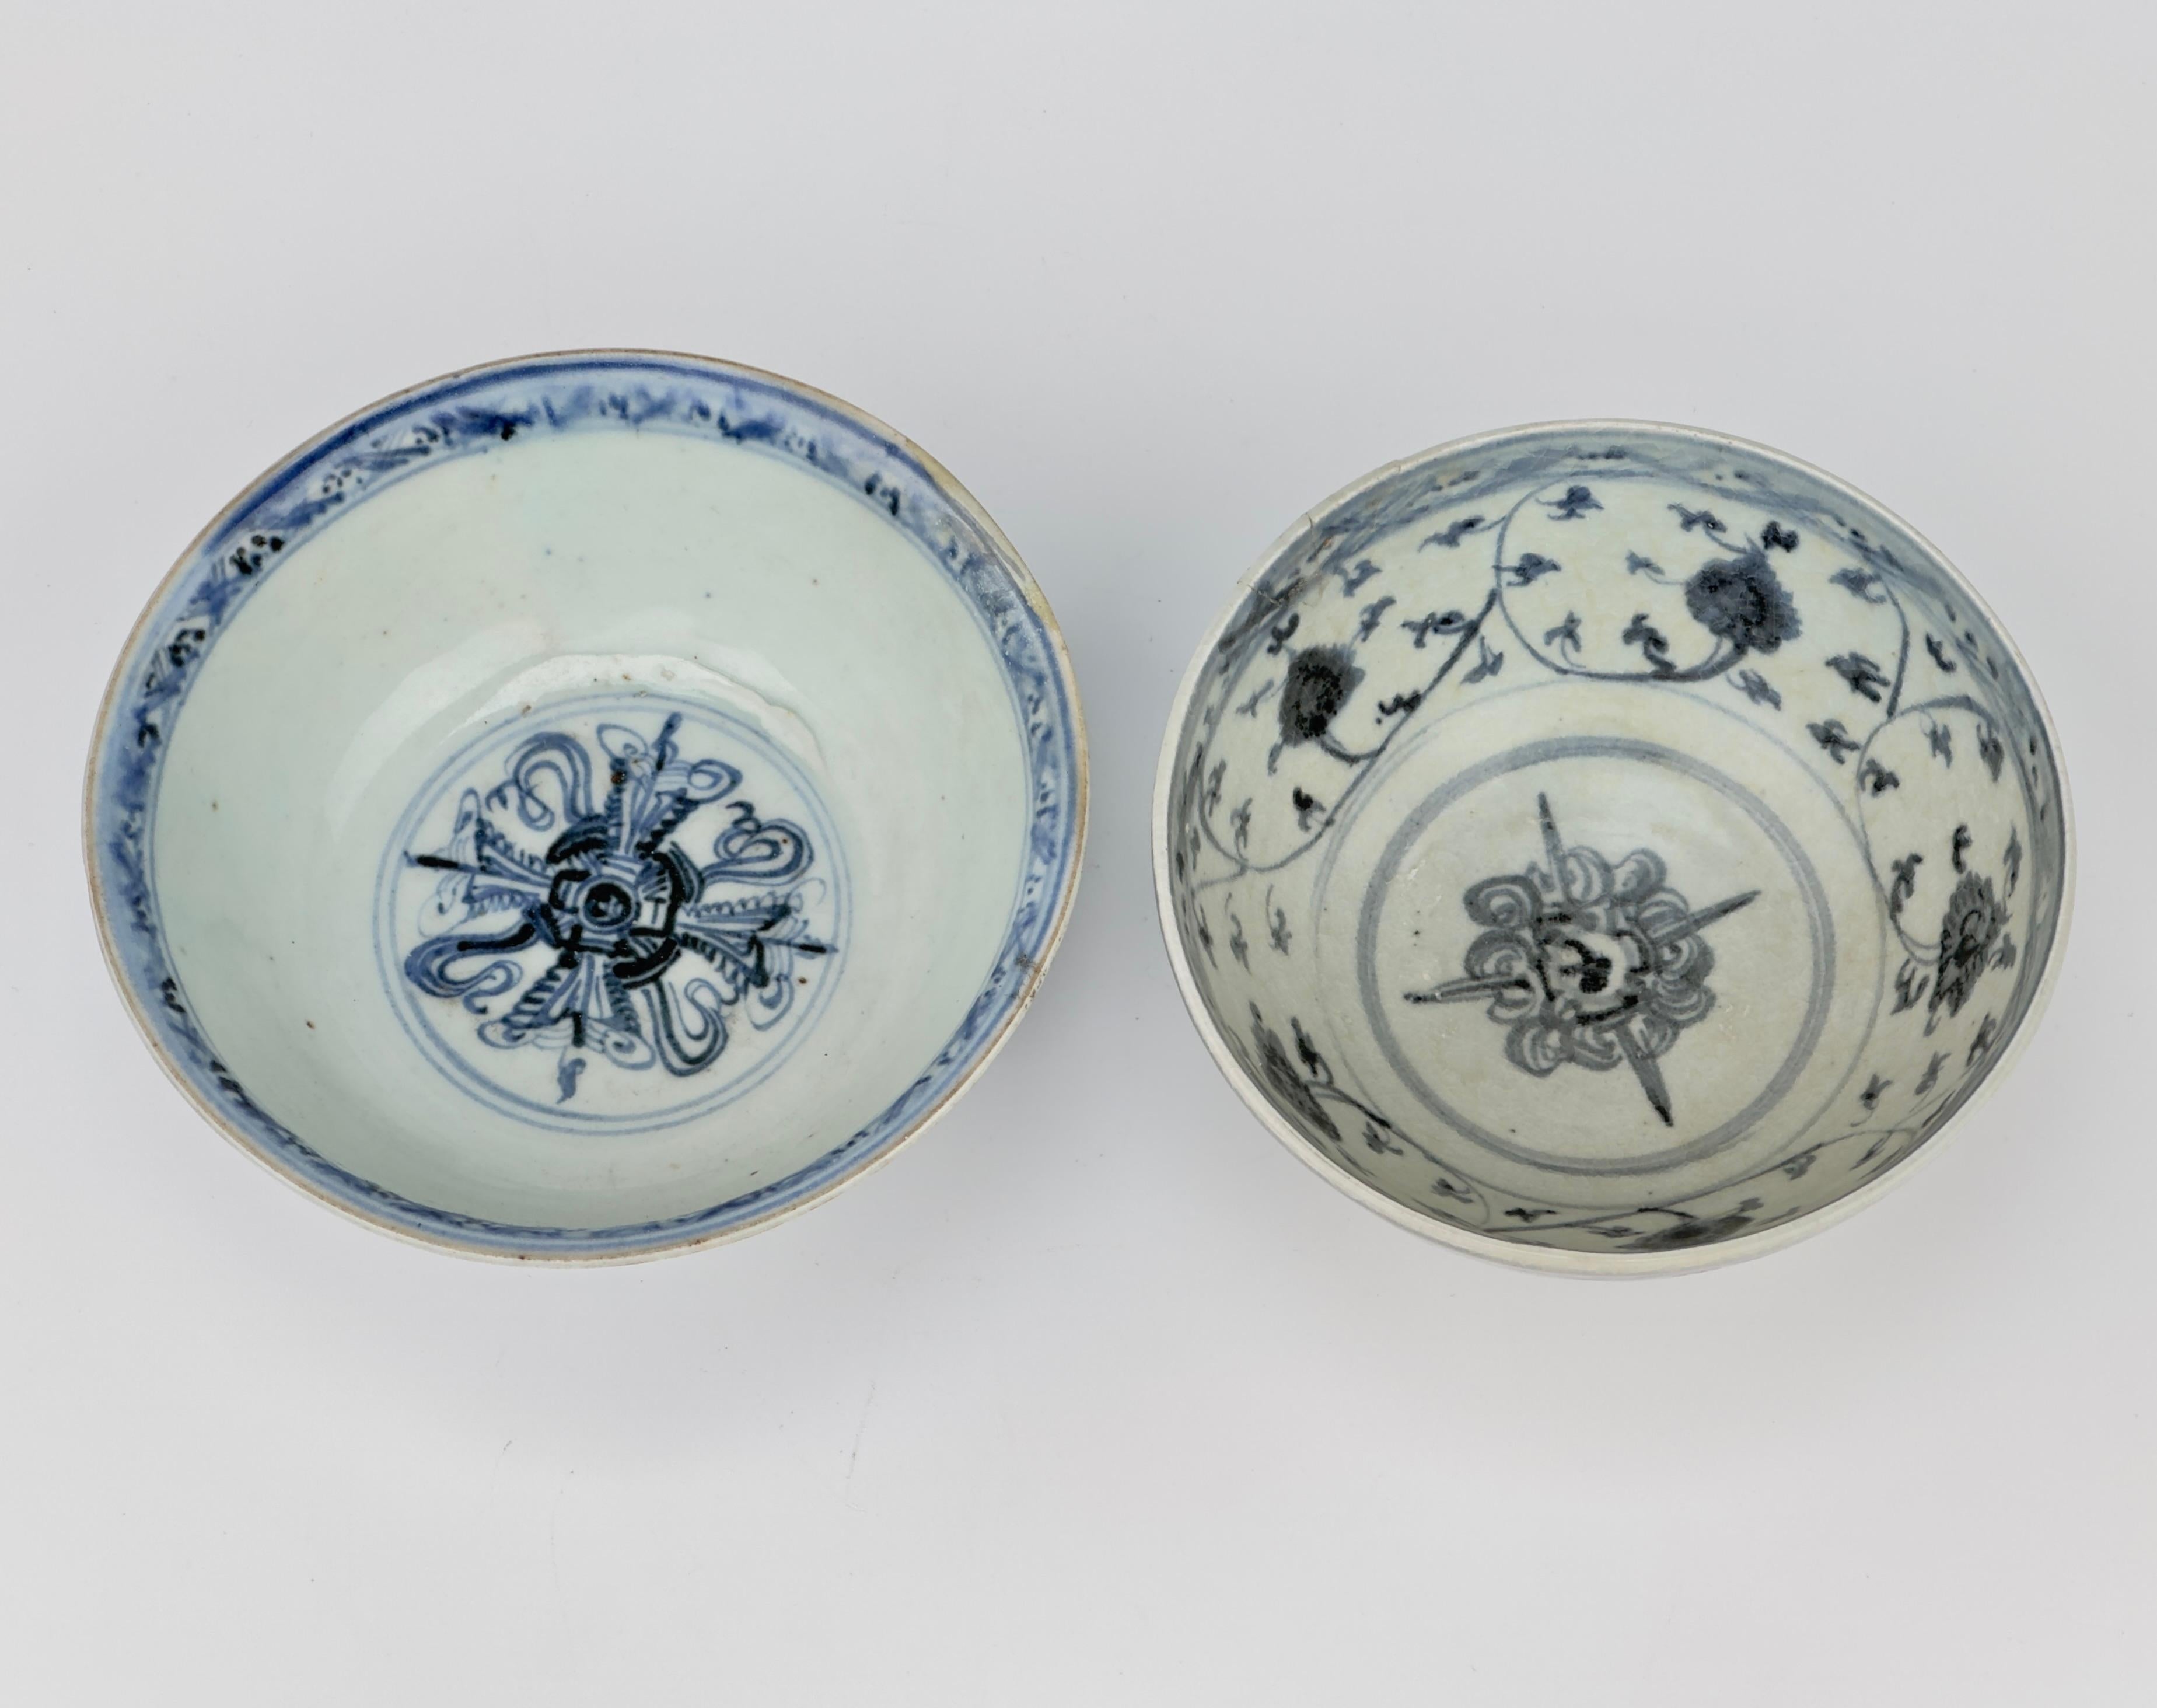 Glazed Two Bowls with knot shaped design on inside, Ming Era(15th century) For Sale